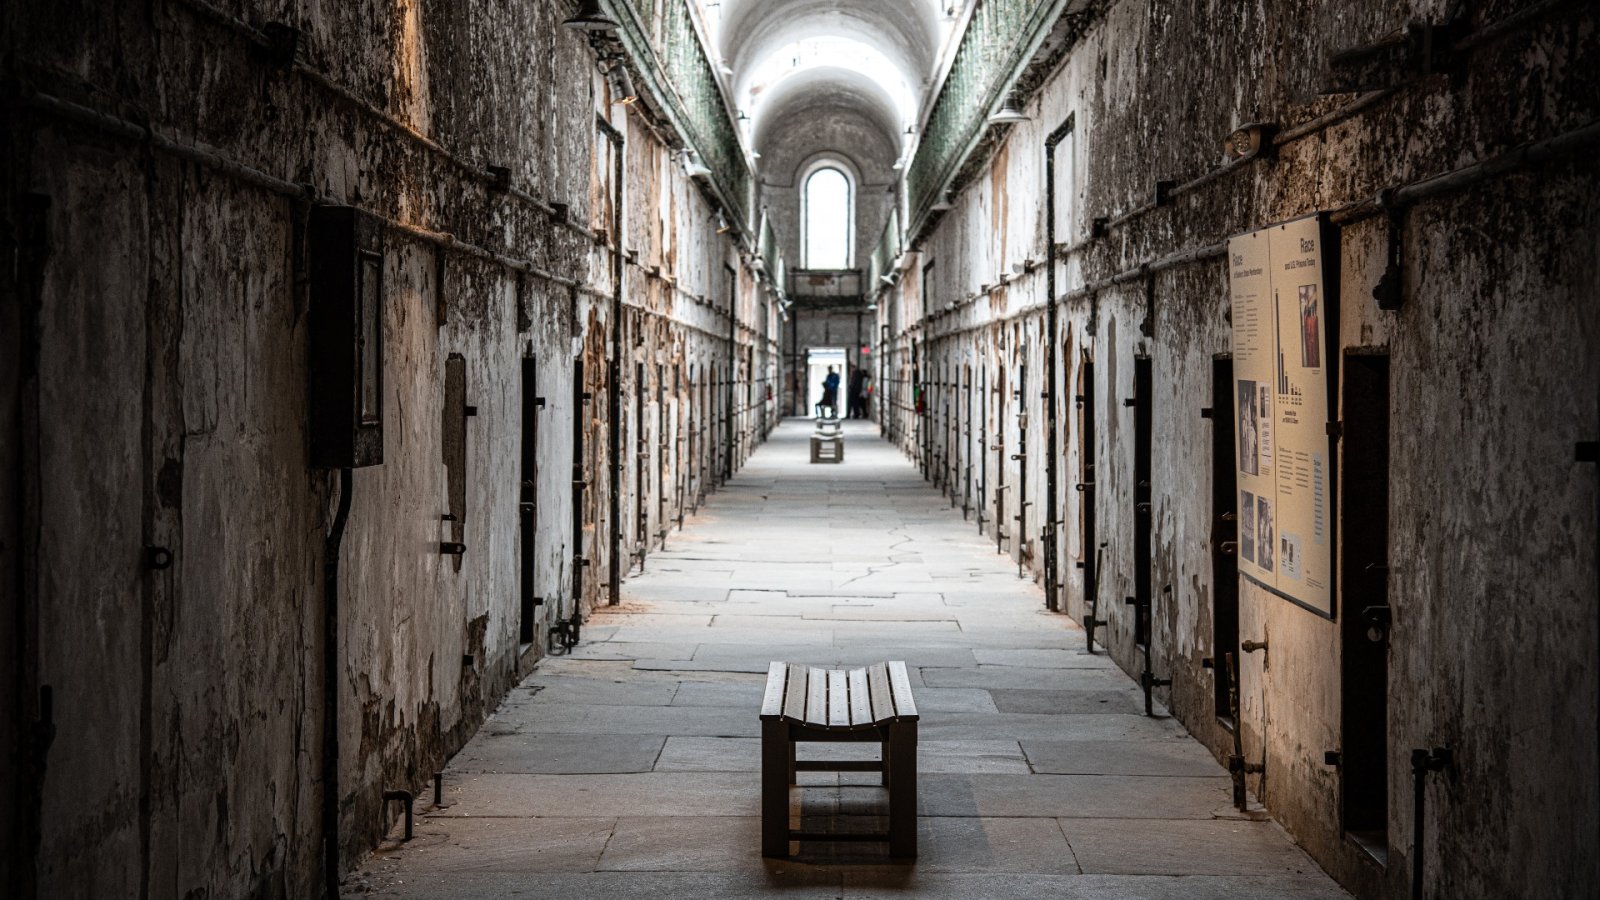 9 creepy spots to visit around the globe, if you like spooky places